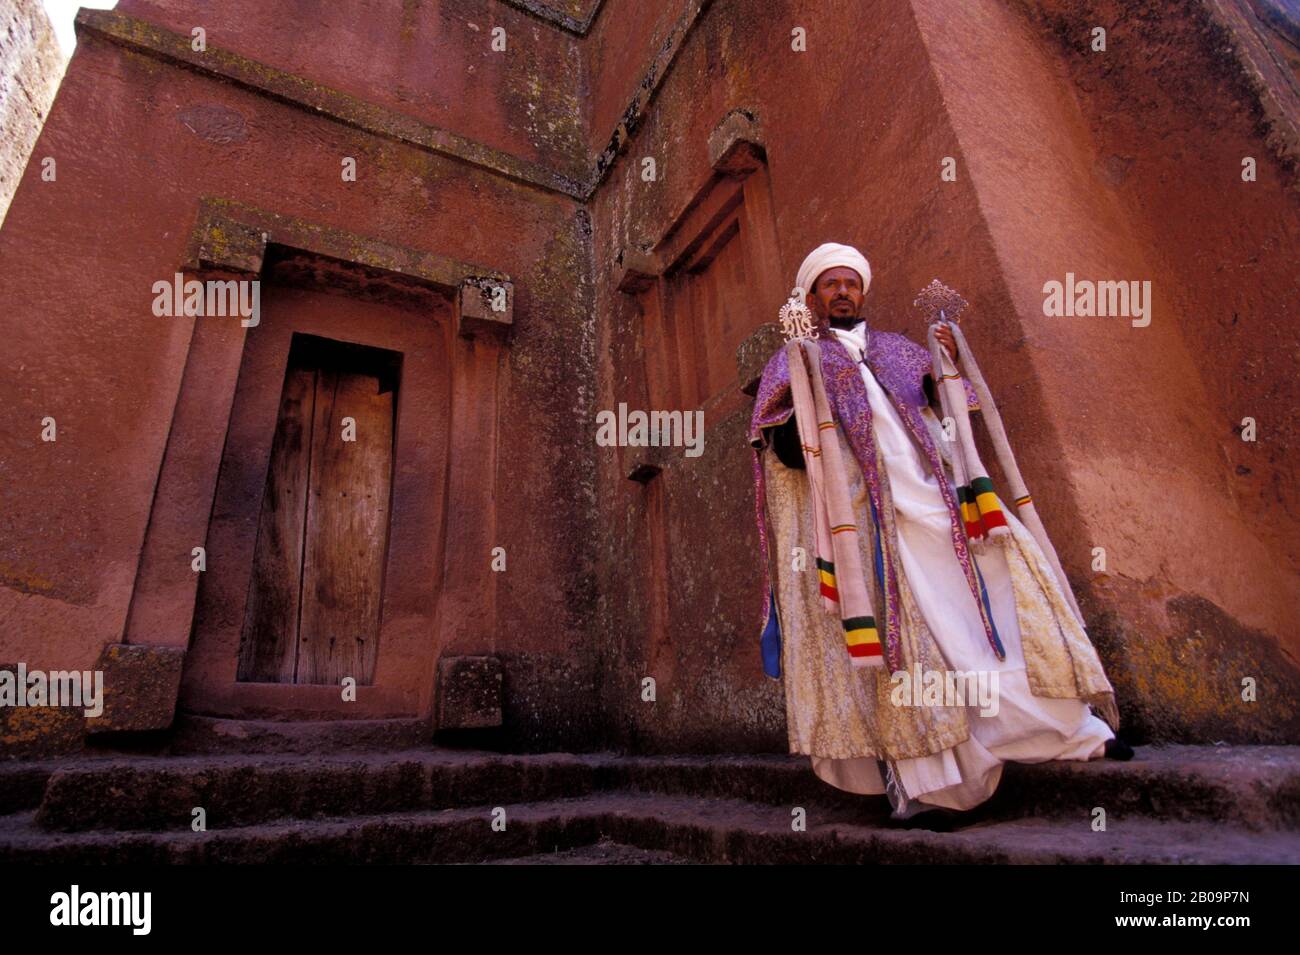 ETHIOPIA, LALIBELA, UNESCO WORLD HERITAGE SITE,  CHURCH CARVED INTO ROCK, CROSS CHURCH, PRIEST WITH CROSS Stock Photo